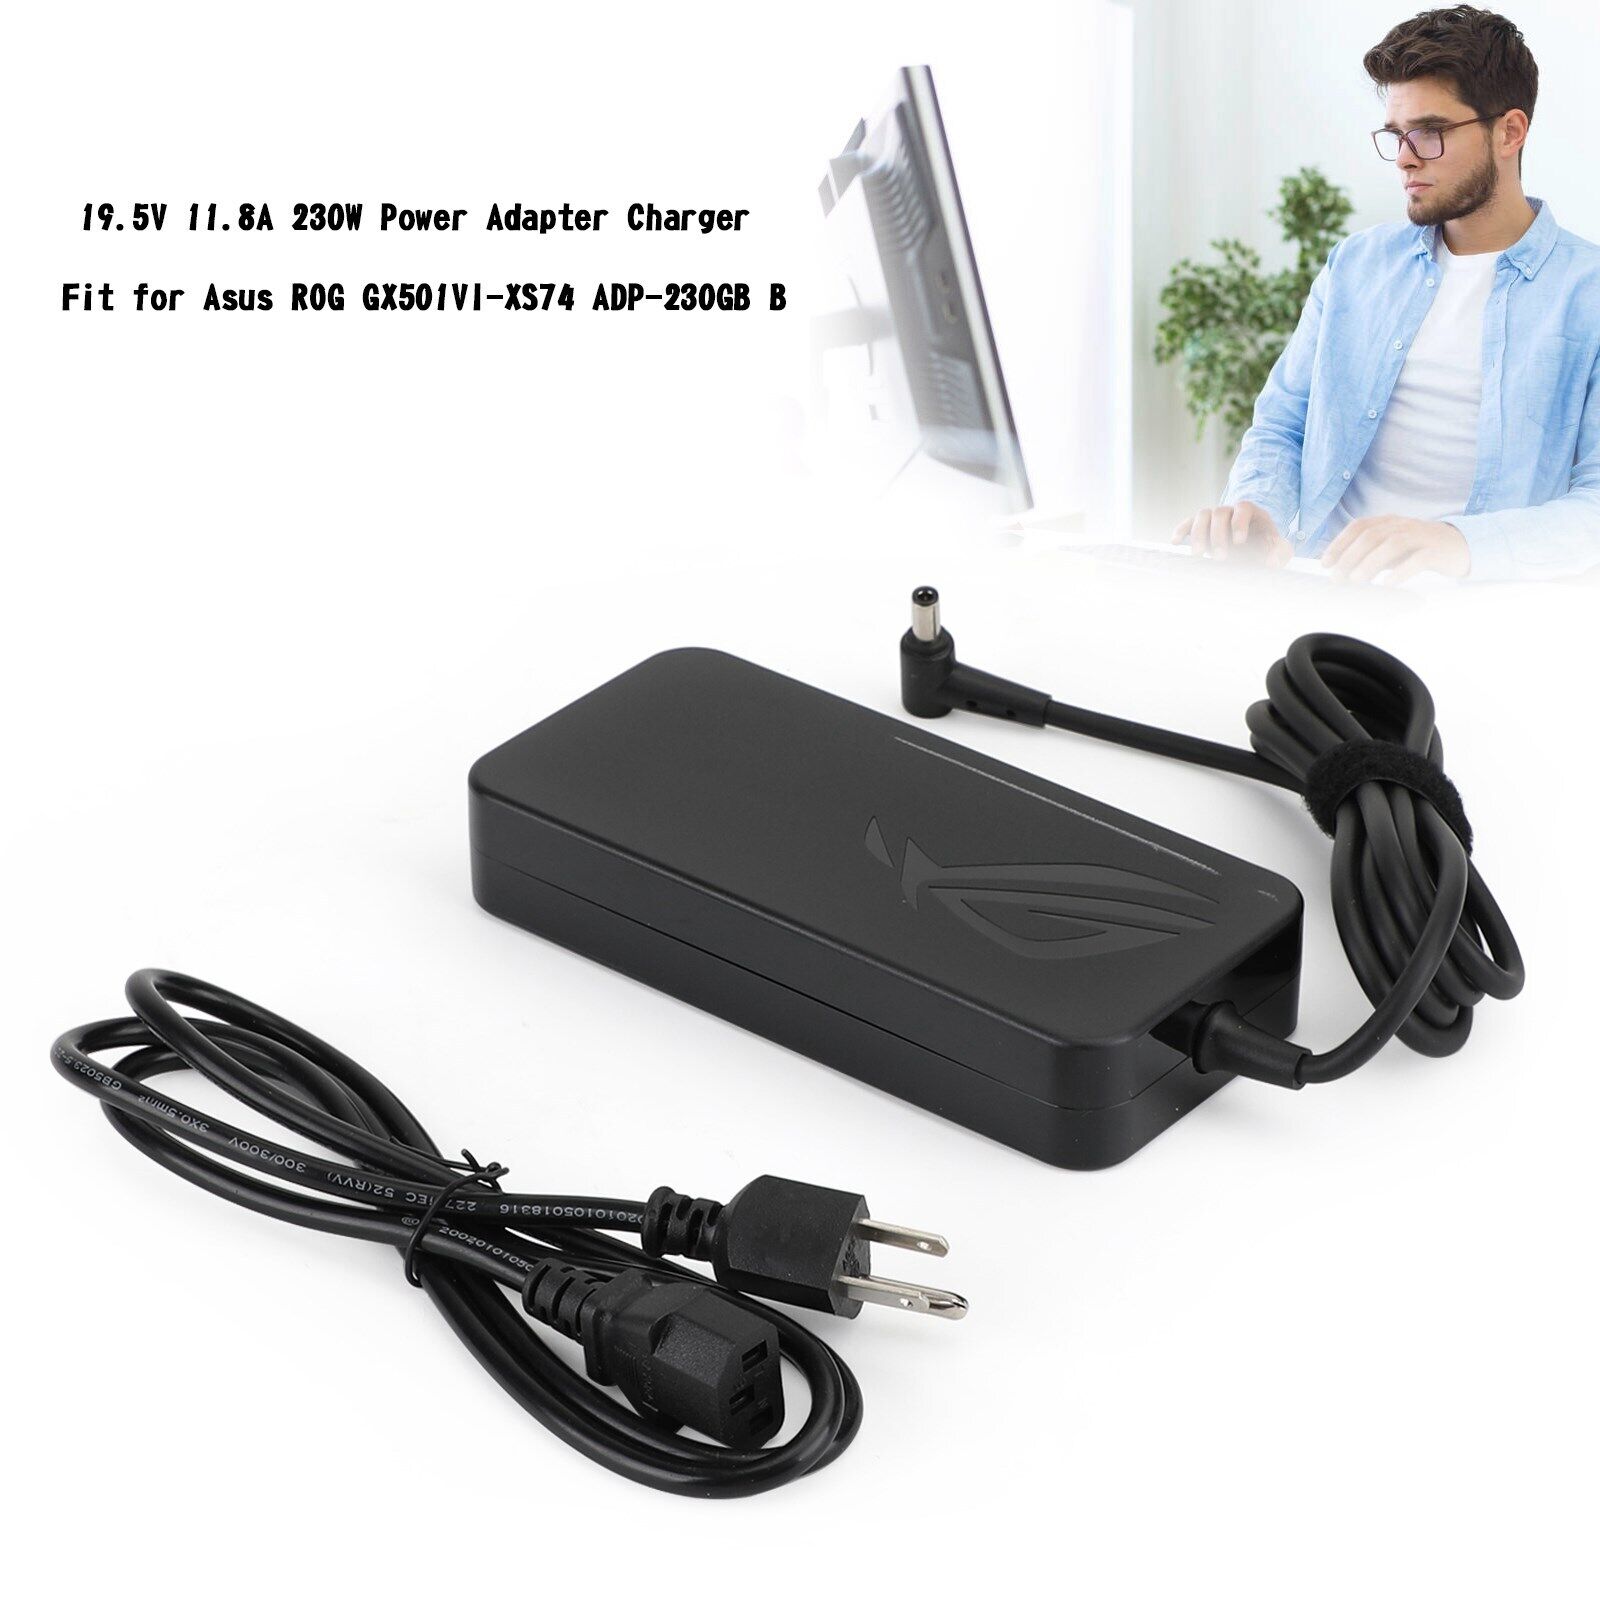 19.5V 11.8A 230W 6.0*3.7mm AC Power Charger Fit for ASUS ROG Strix ADP-230GB EP